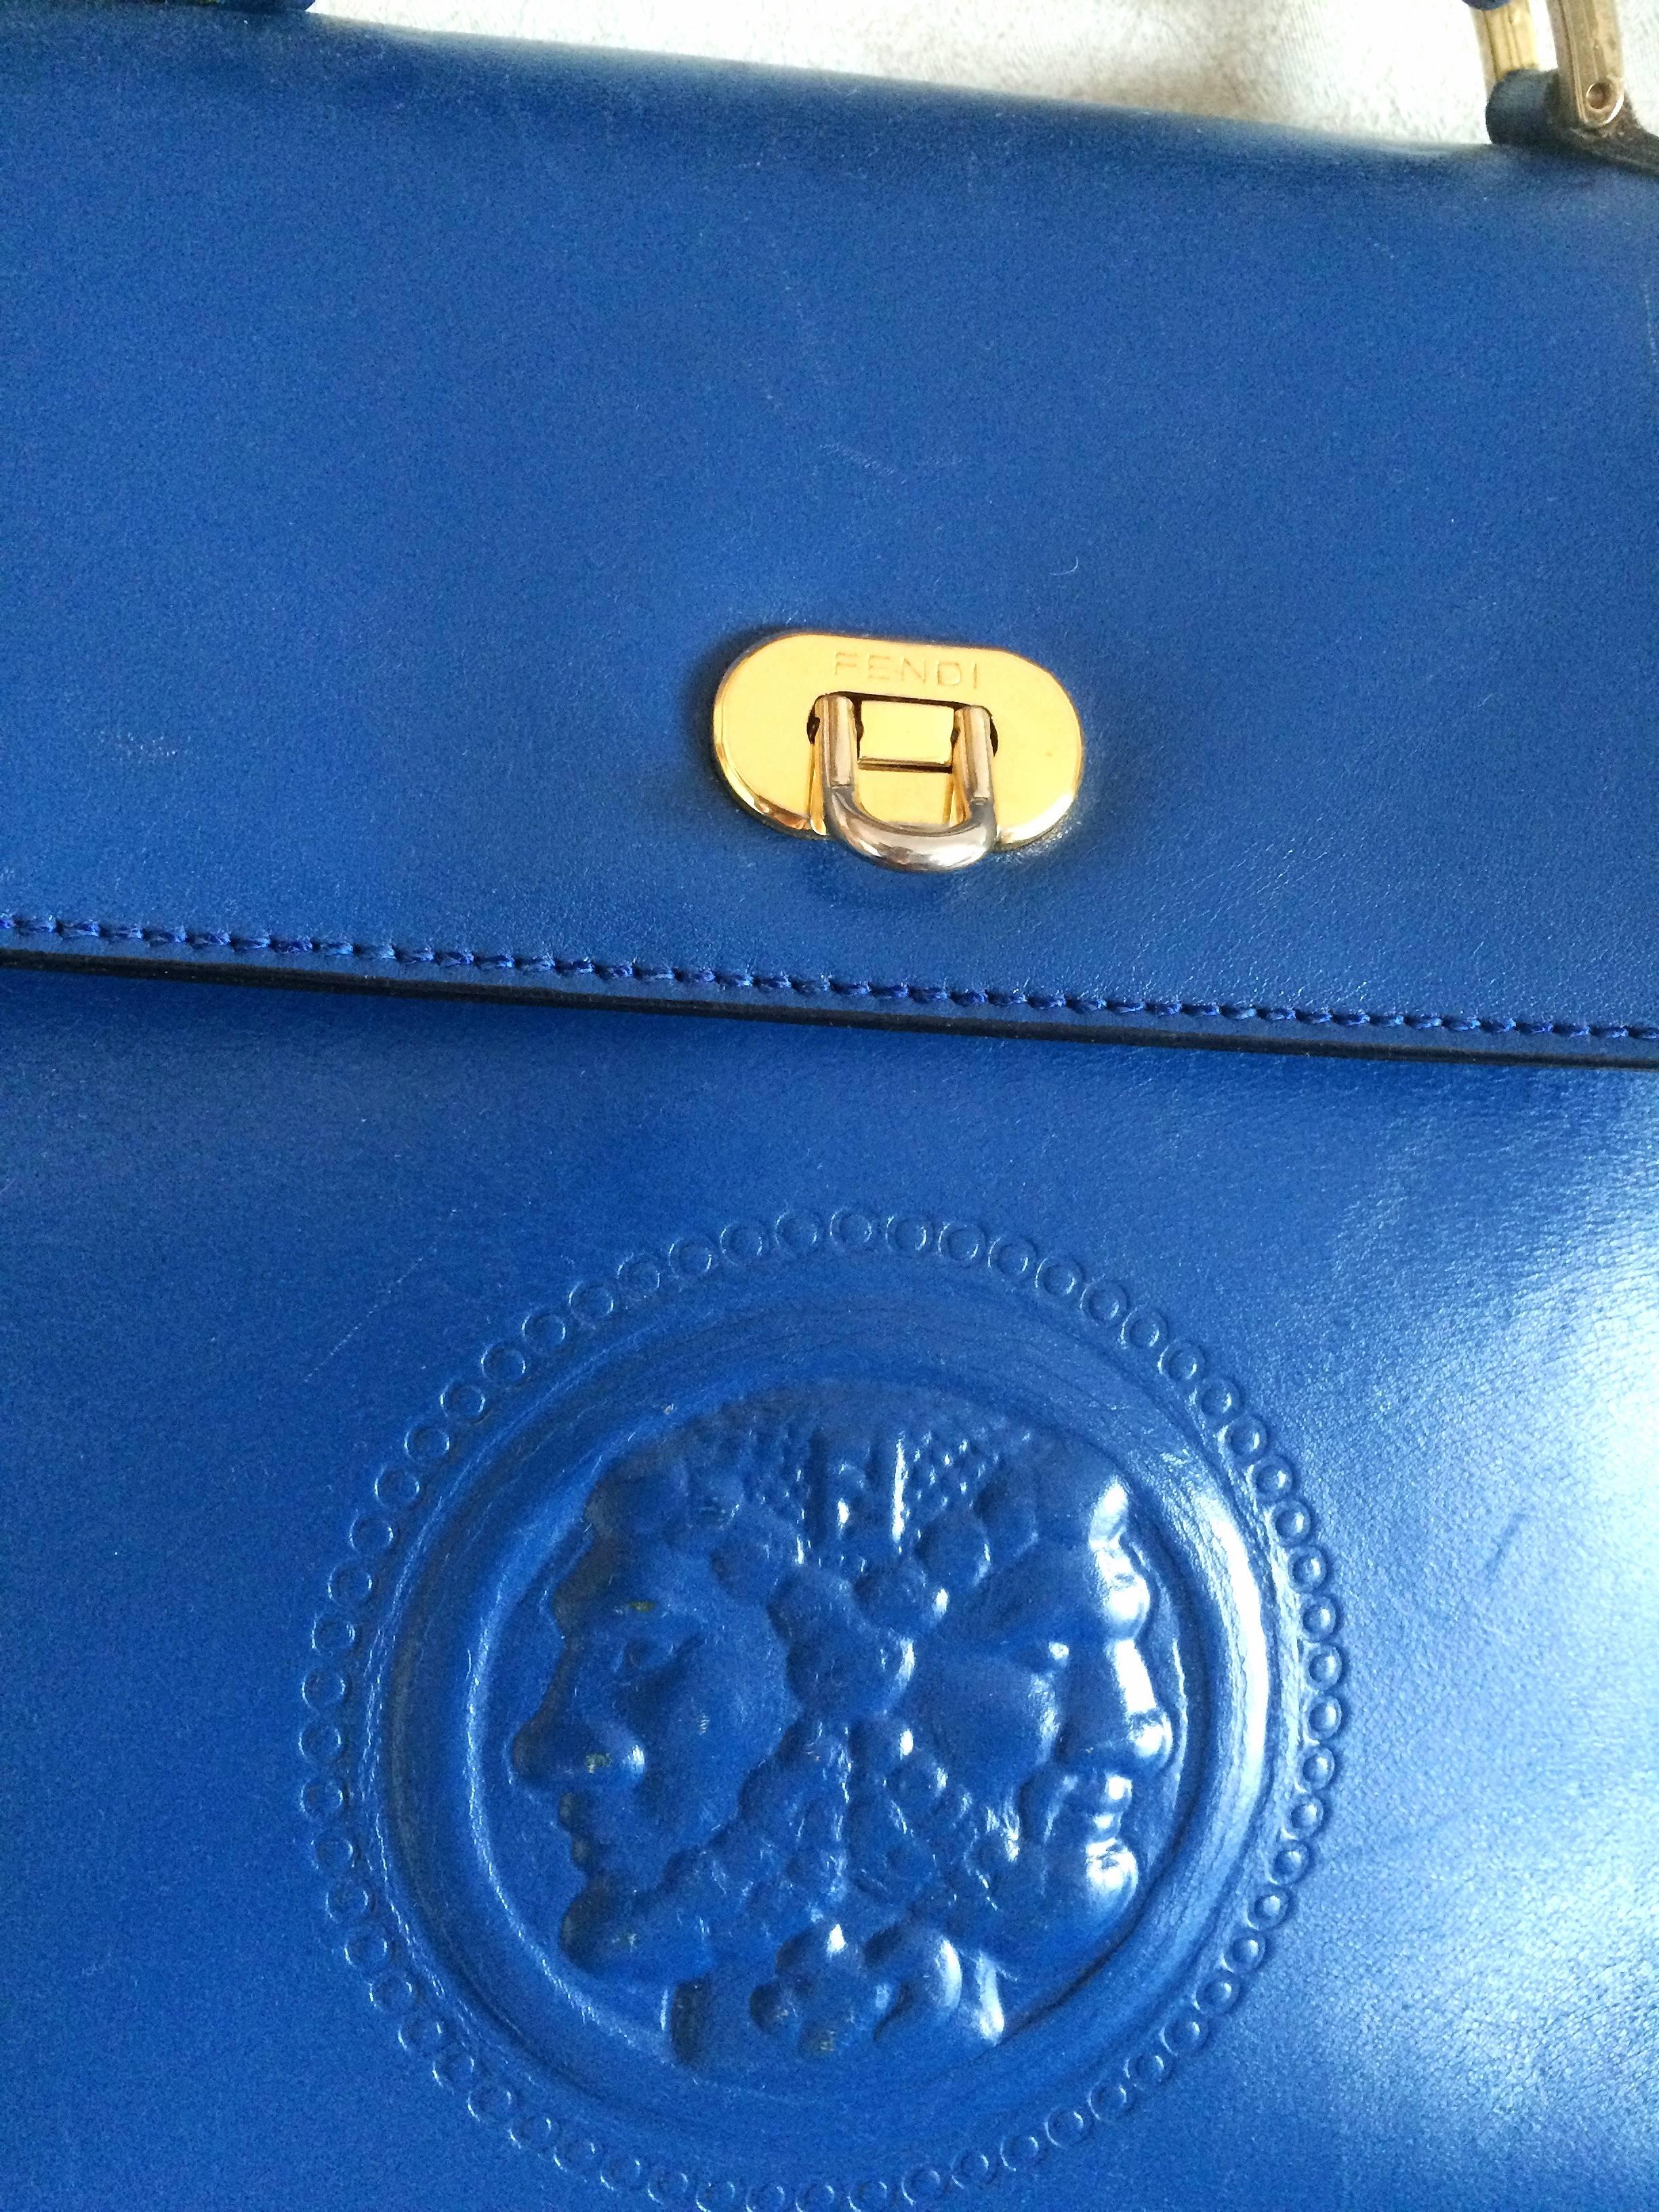 1990s. Vintage FENDI blue leather classic kelly style handbag with iconic Janus medallion embossed motif at front.

For all FENDI vintage lovers, this unique and rare vintage masterpiece is right for you!
Classic Kelly bag style purse in blue